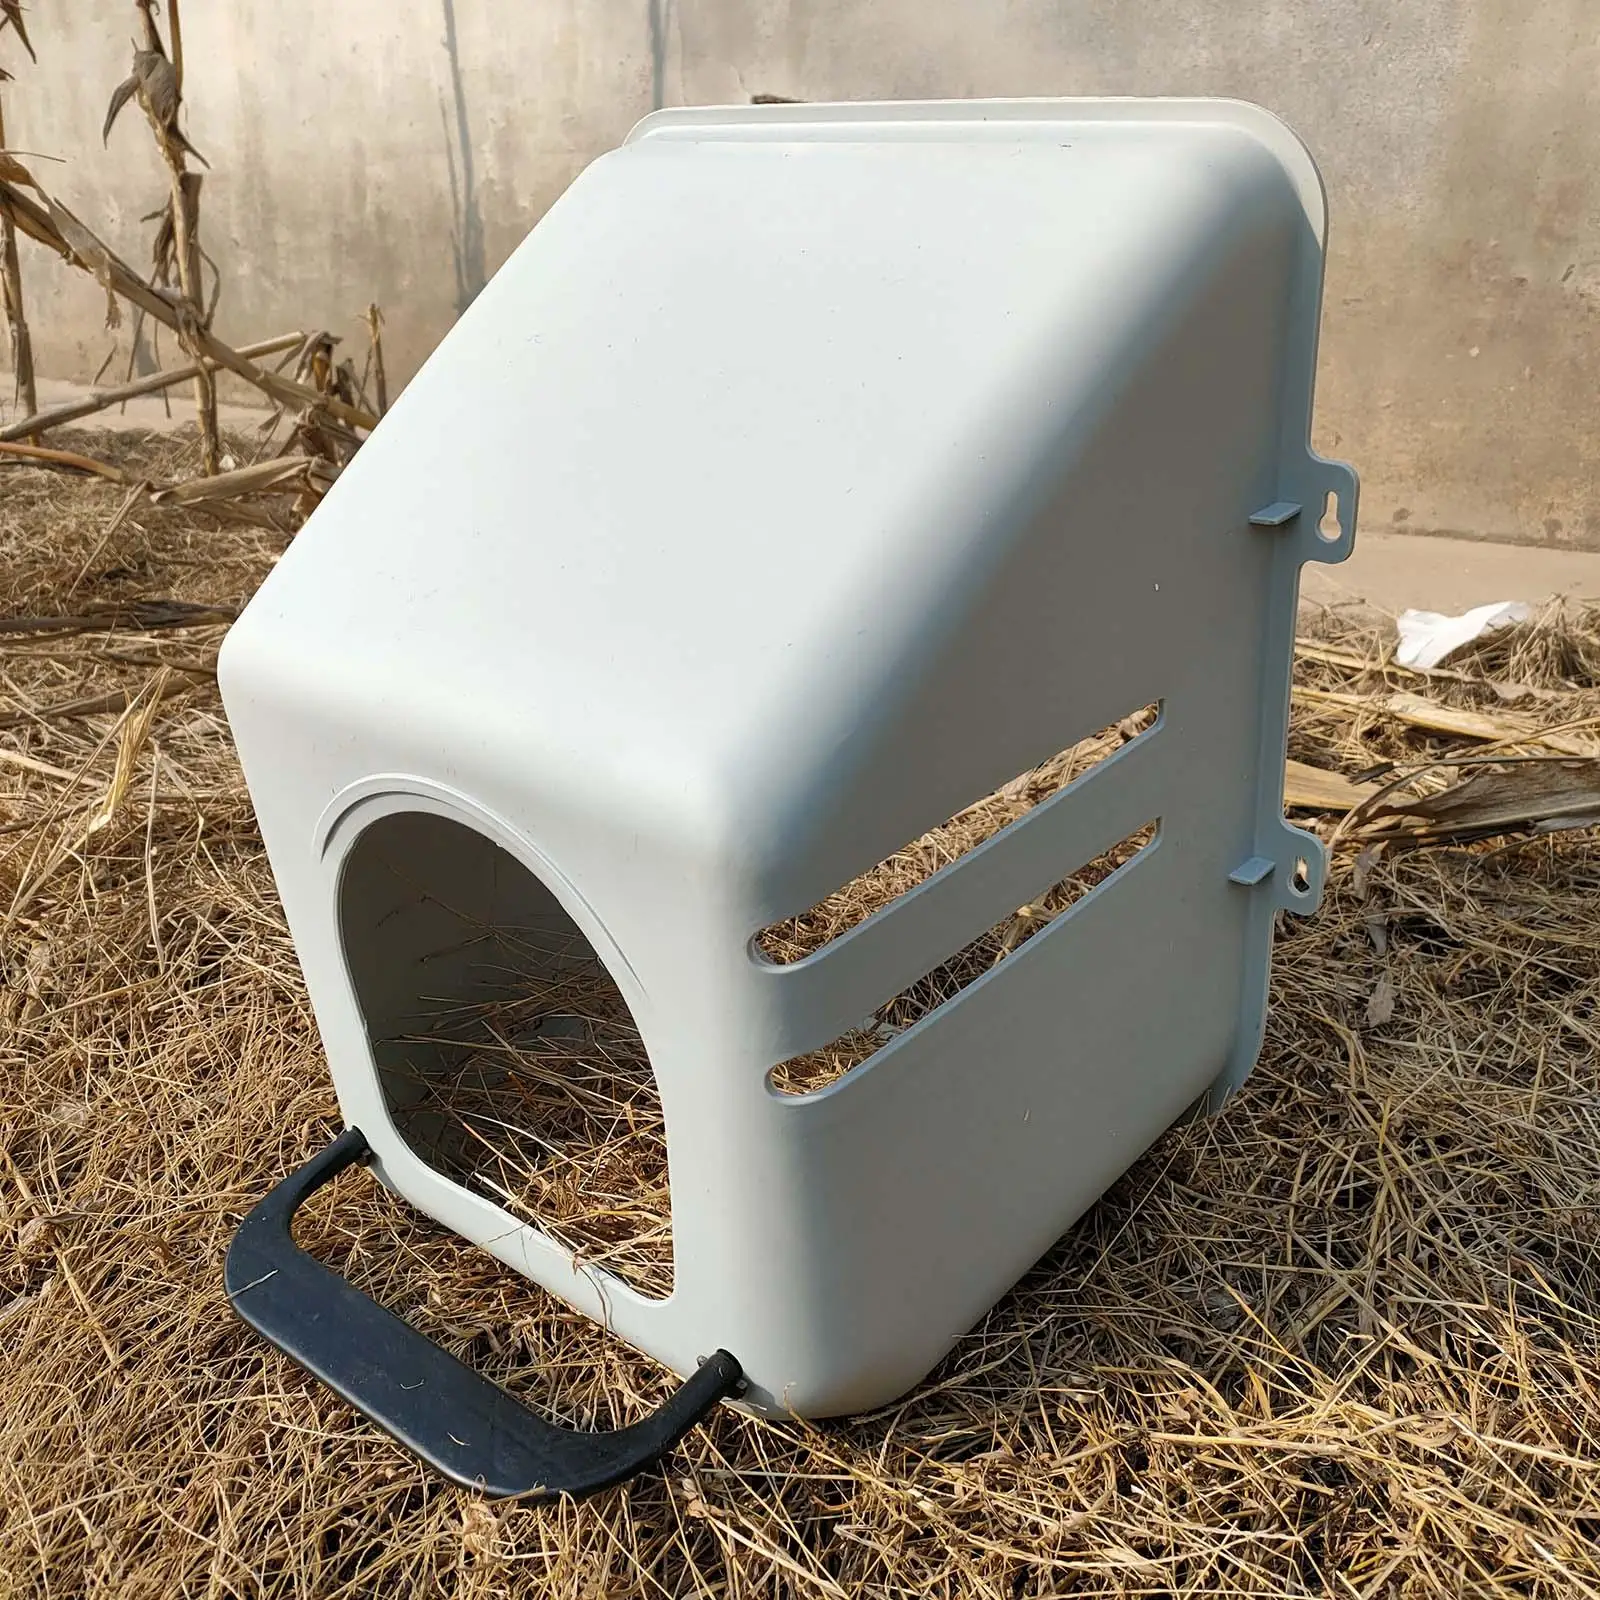 Hen Nest Box Comfortable Sturdy Durable Chicken Nest Box Chicken Laying Box for Farm Home Chicken Coop Poultry Supplies